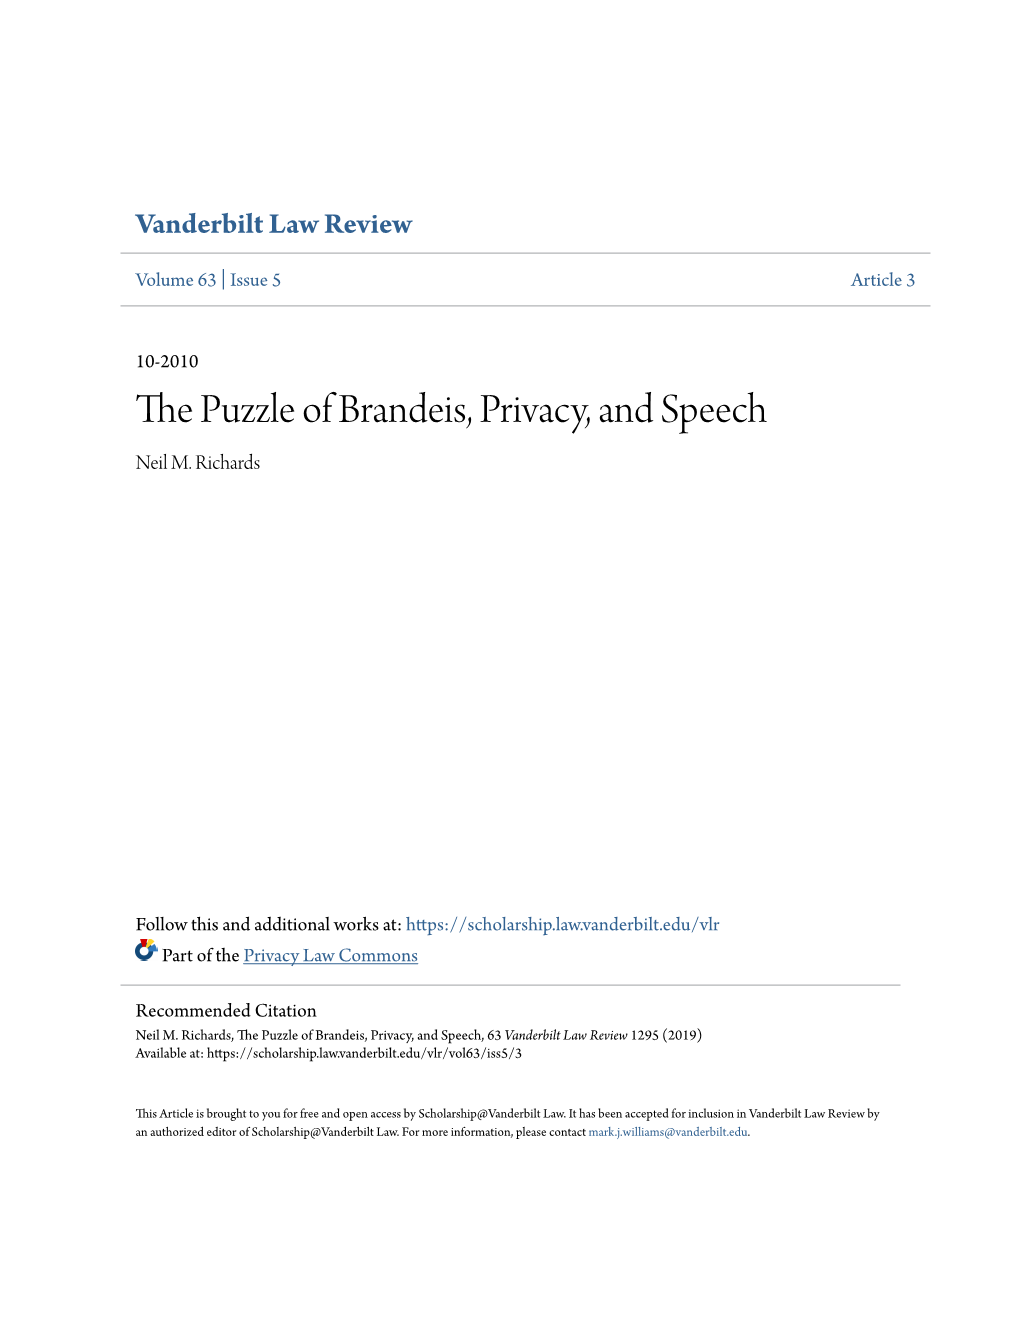 The Puzzle of Brandeis, Privacy, and Speech Neil M